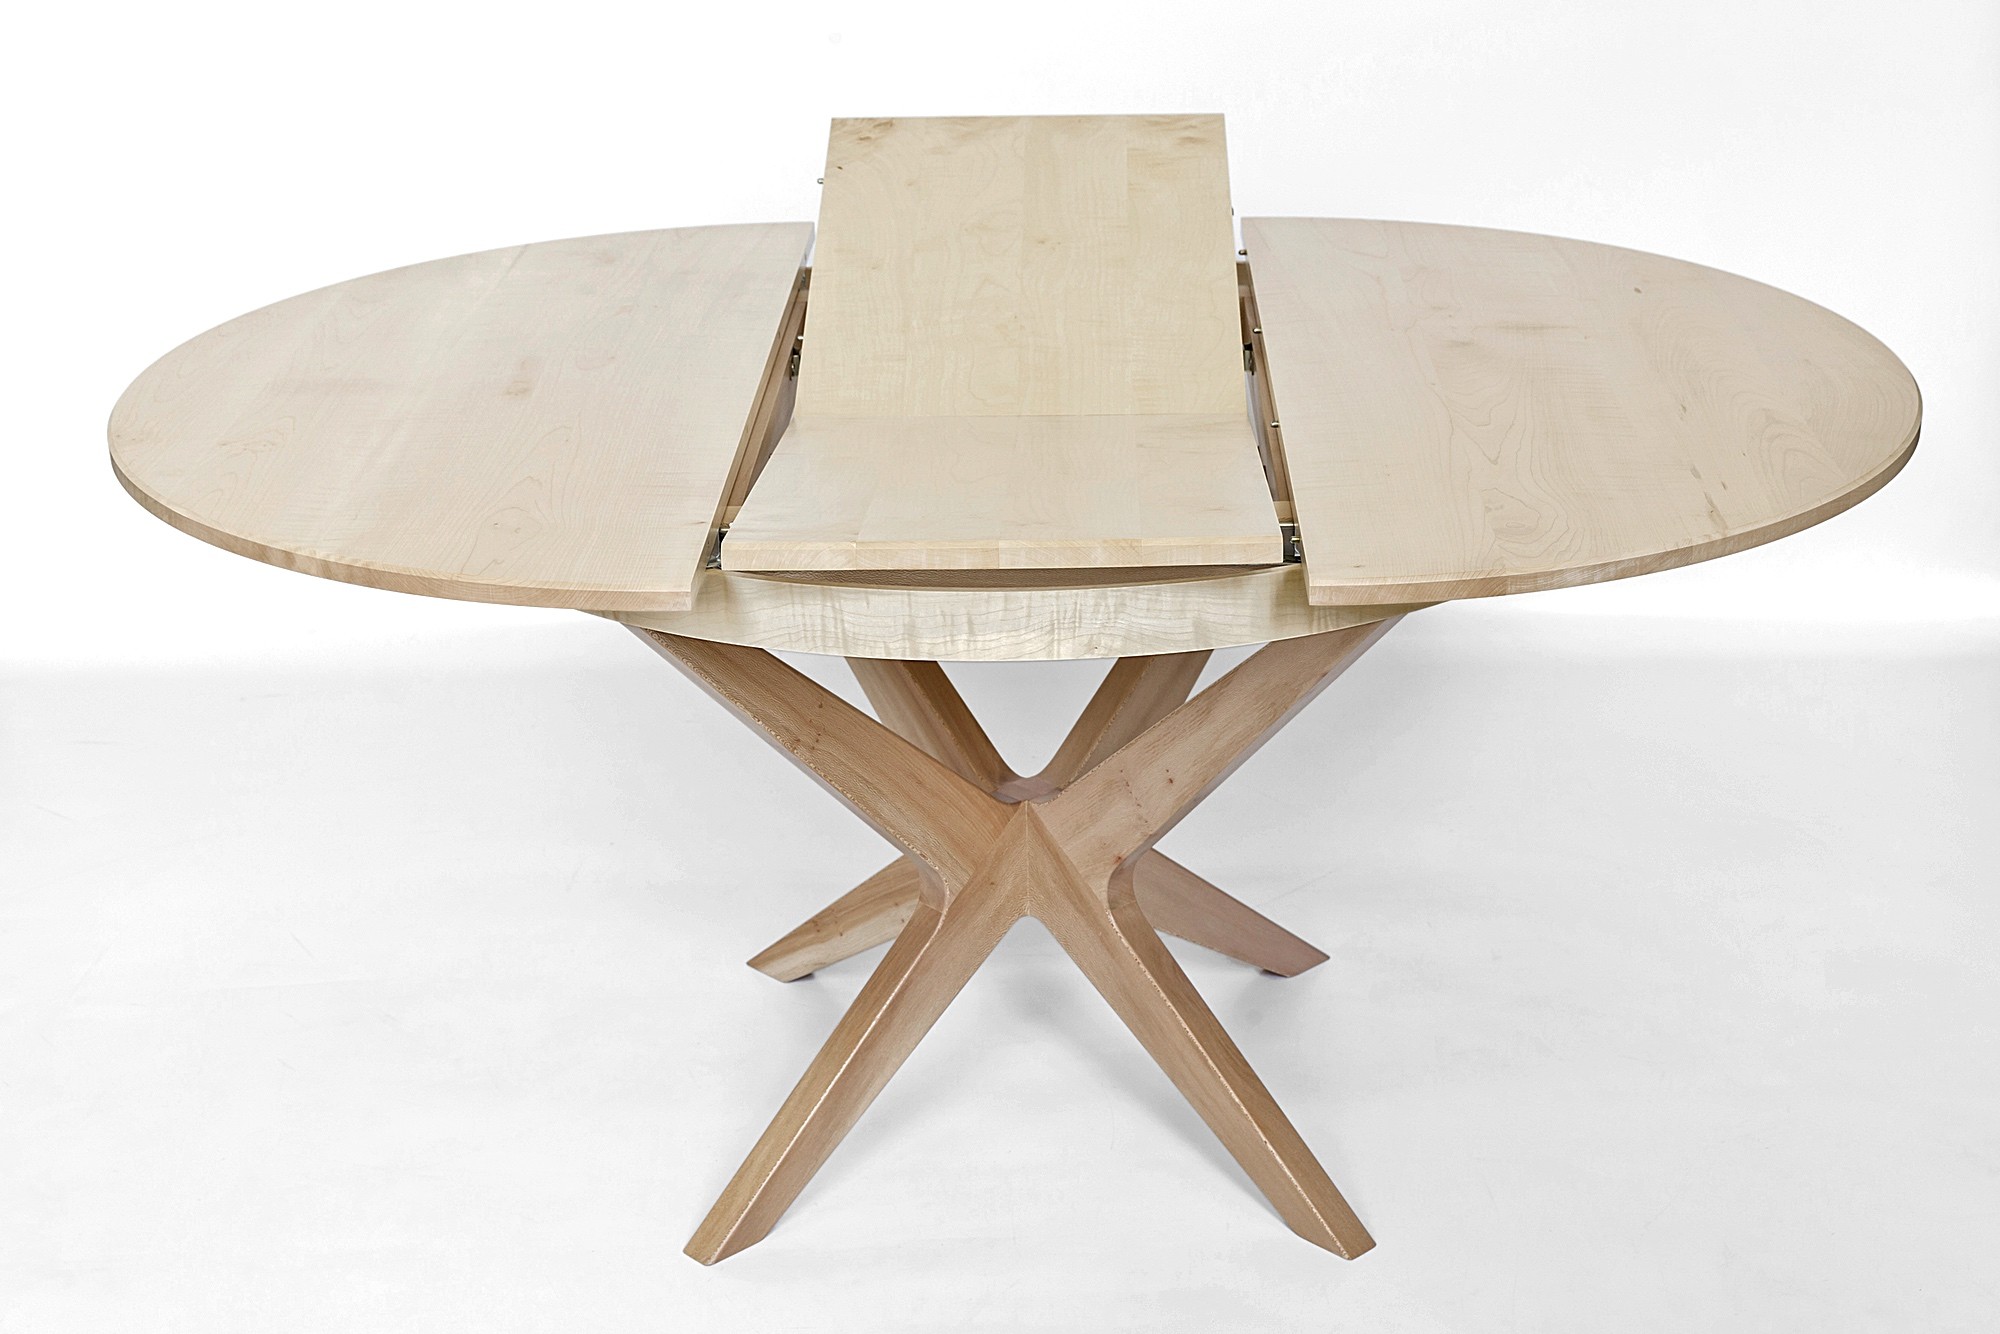 Extending dining table showing butterfly leaf extension